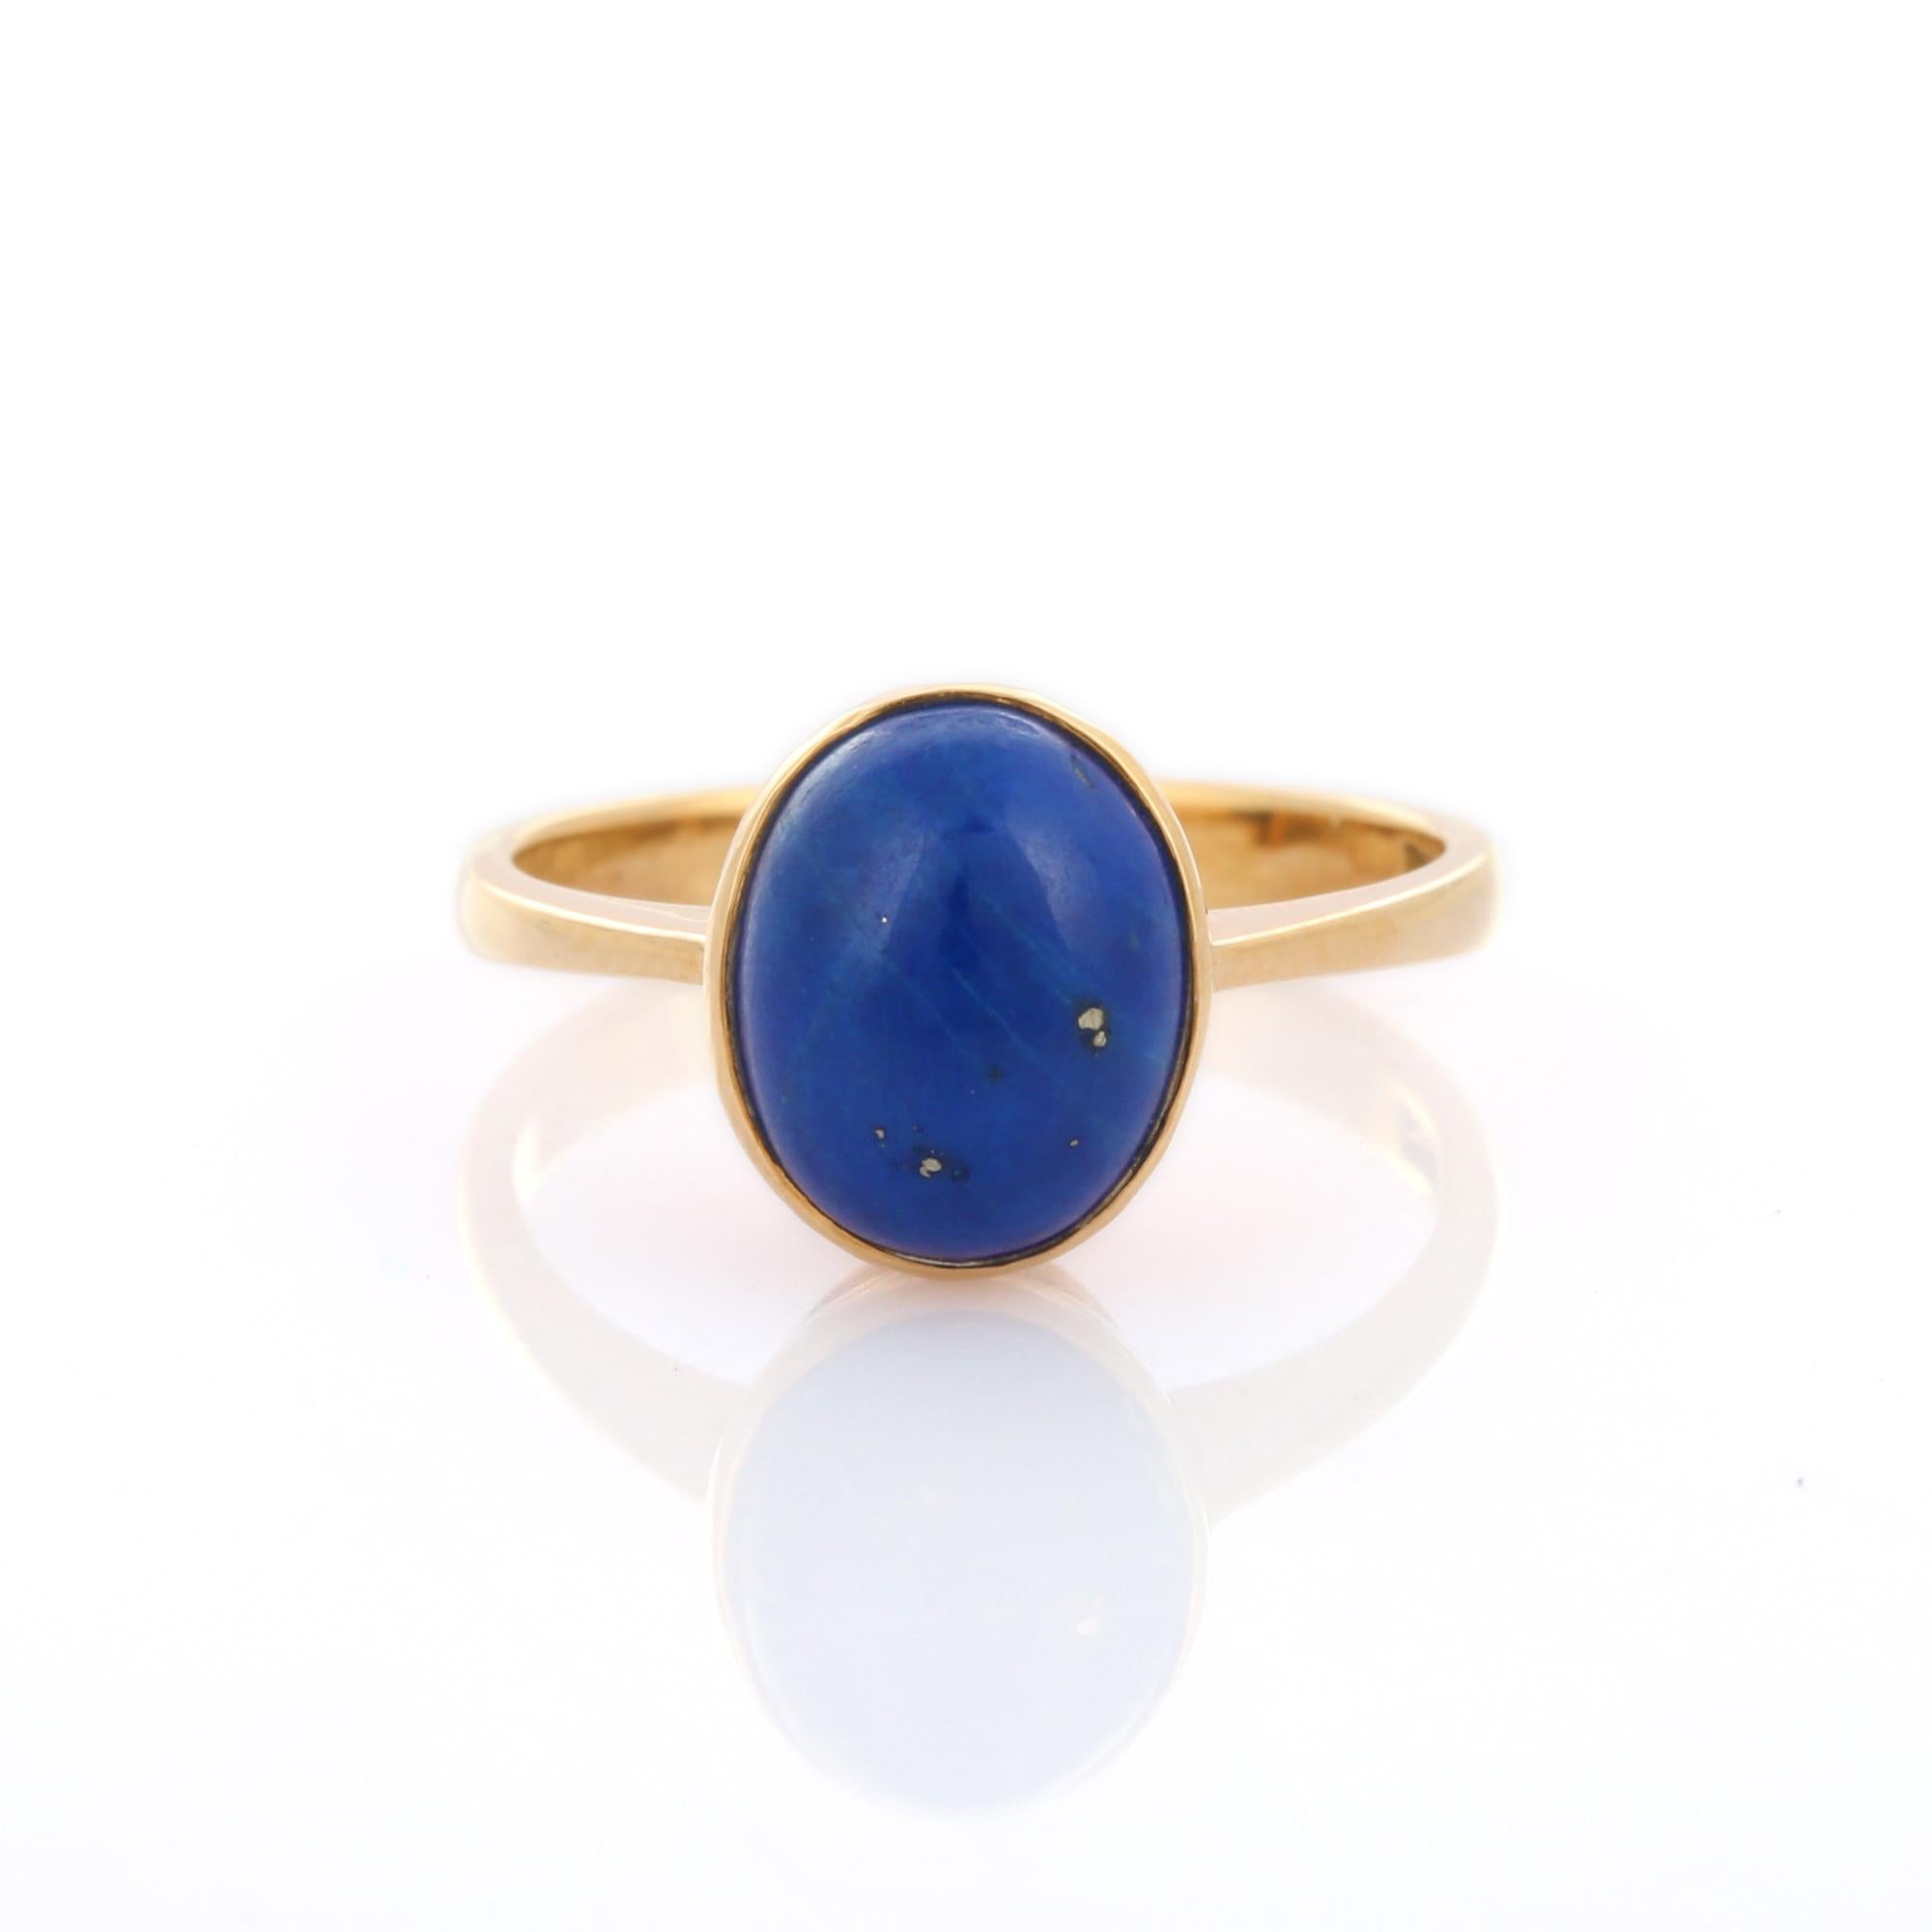 For Sale:  2.87 Carat Lapis Lazuli Solitaire Ring in 18K Yellow Gold  9